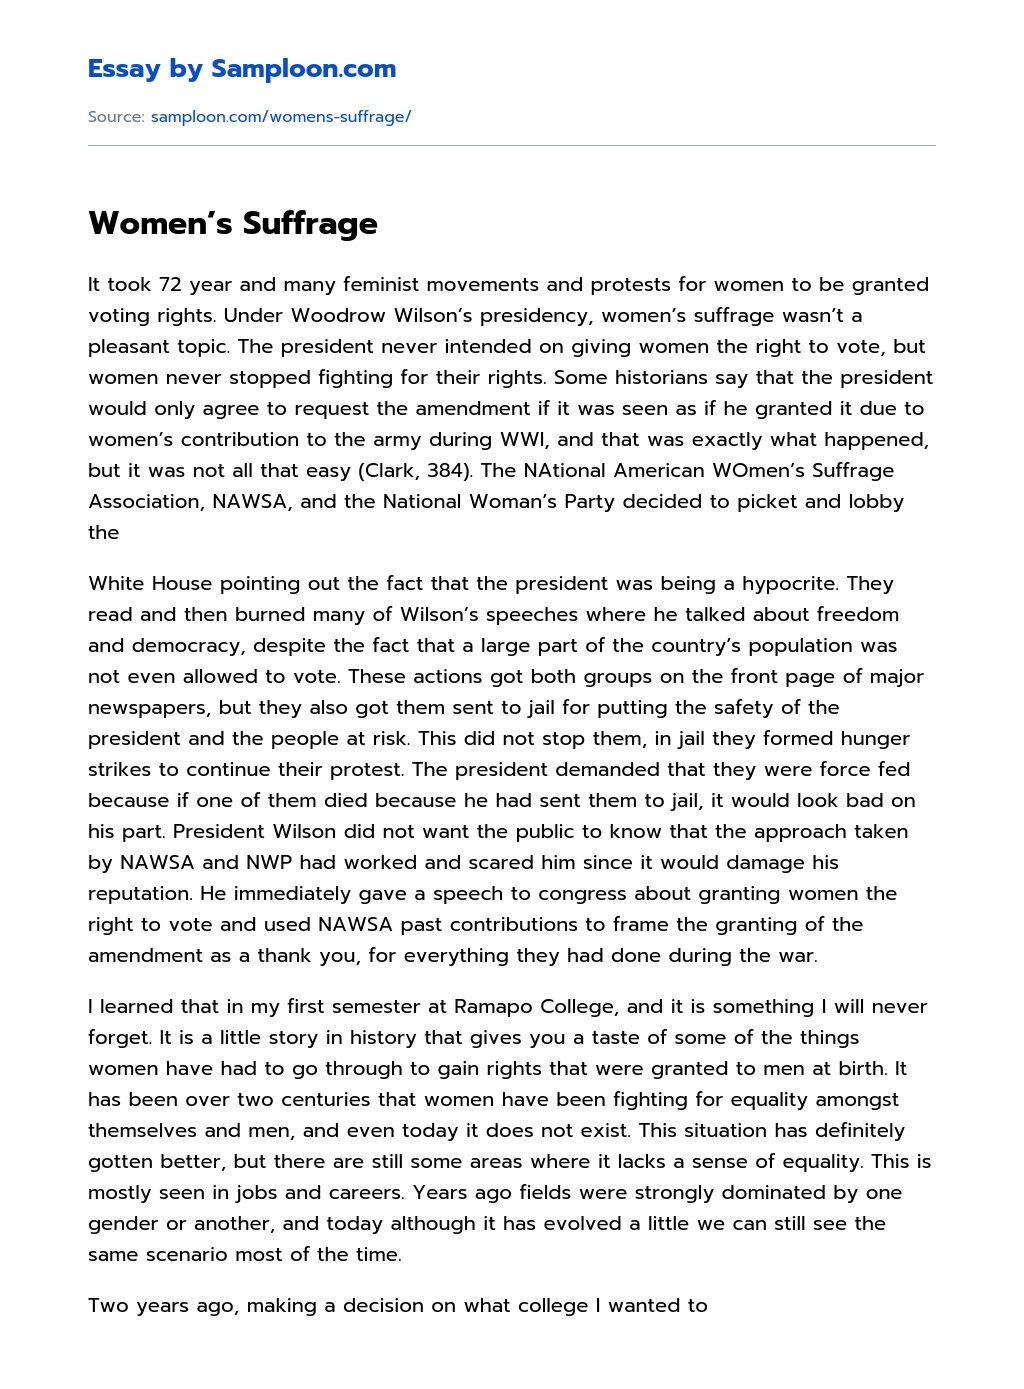 women's suffrage essay introduction